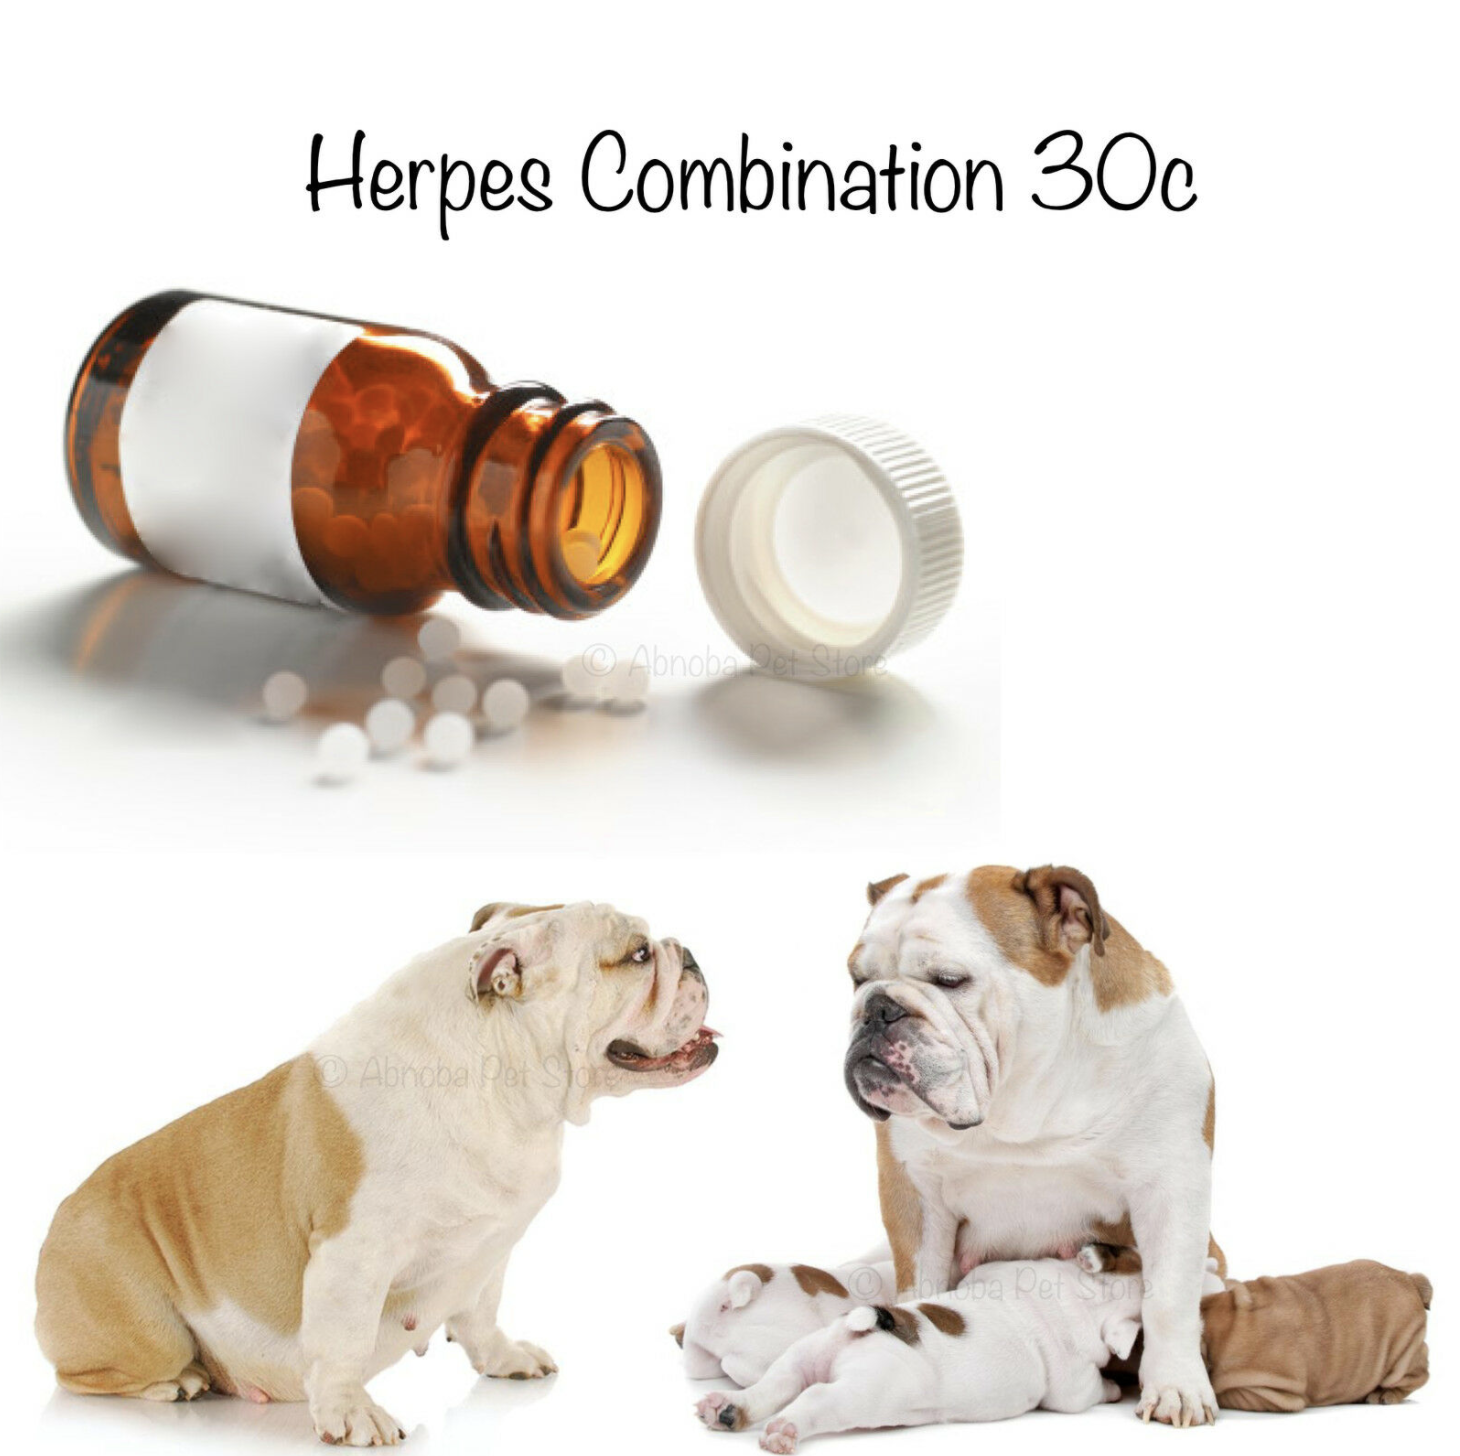 Herpes Combination 30c (Homeopathic Nosodes)-10g